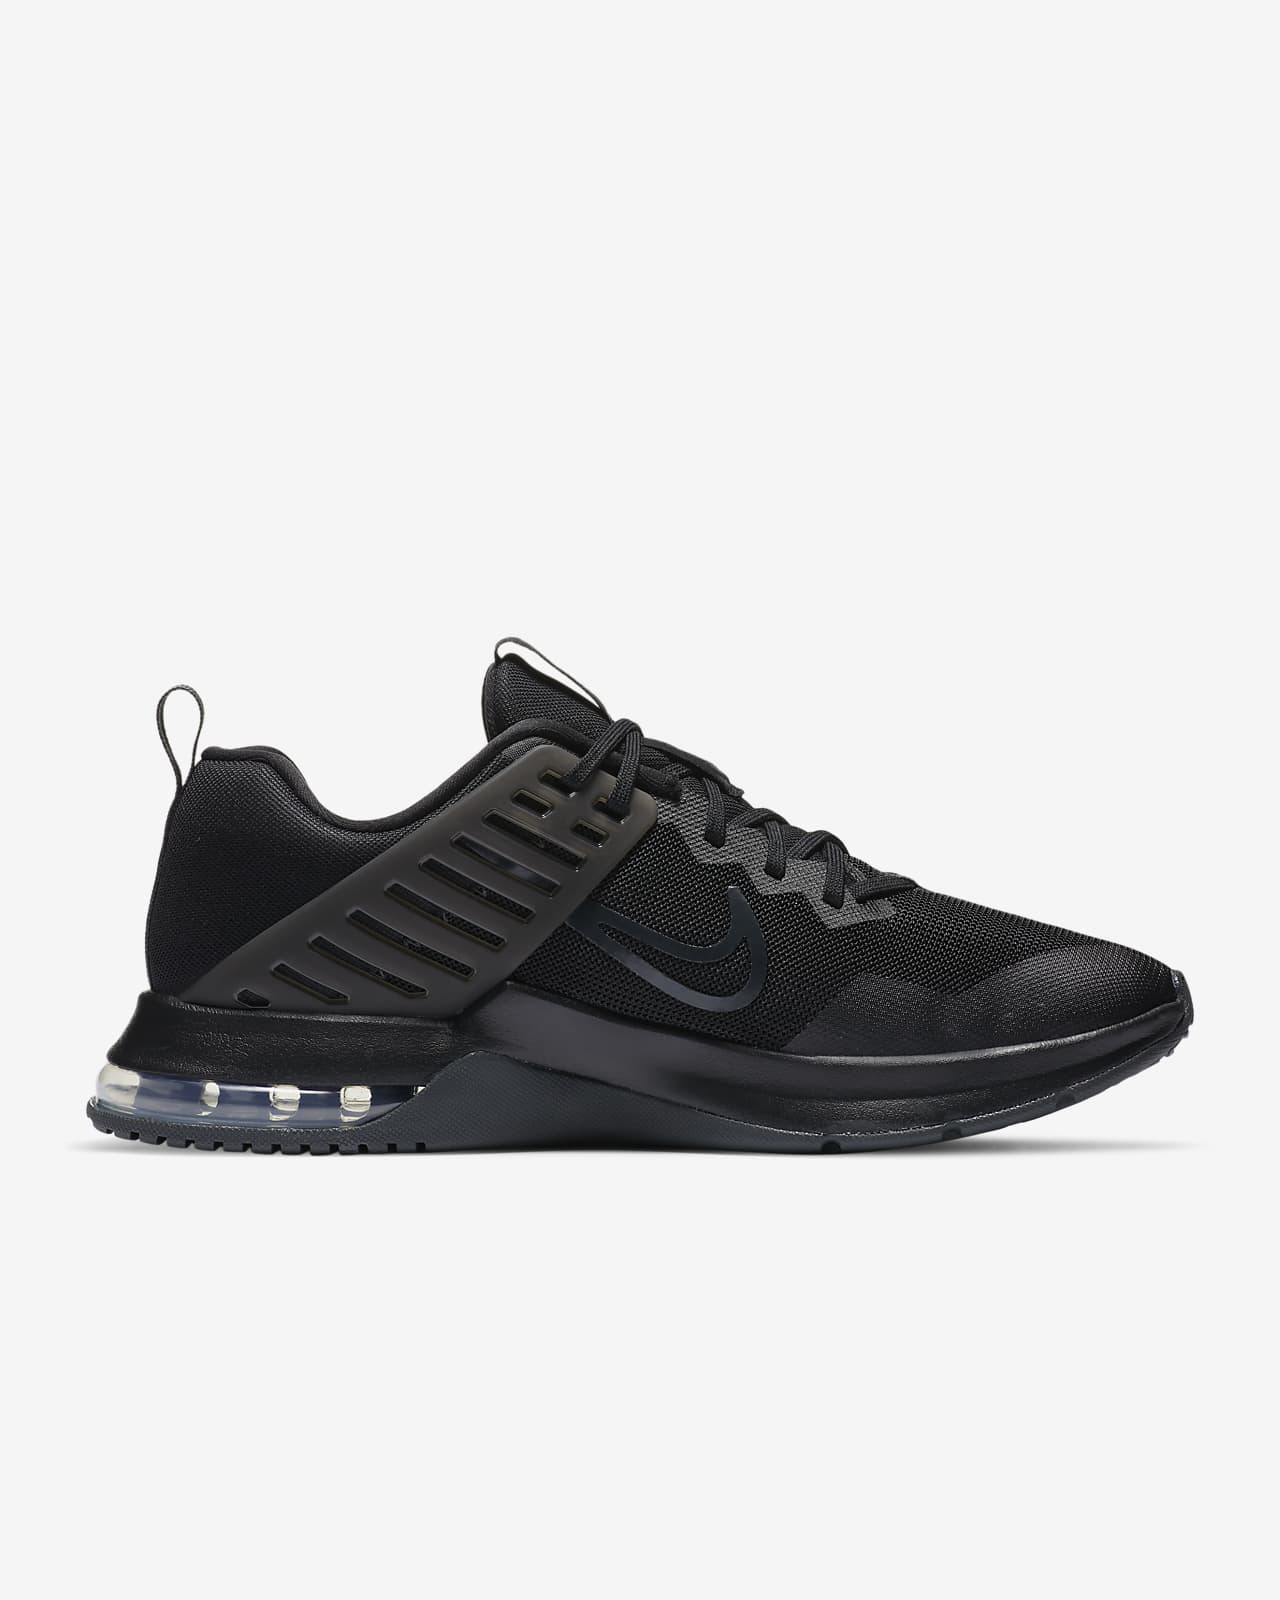 nike air max alpha trainer men's training shoes